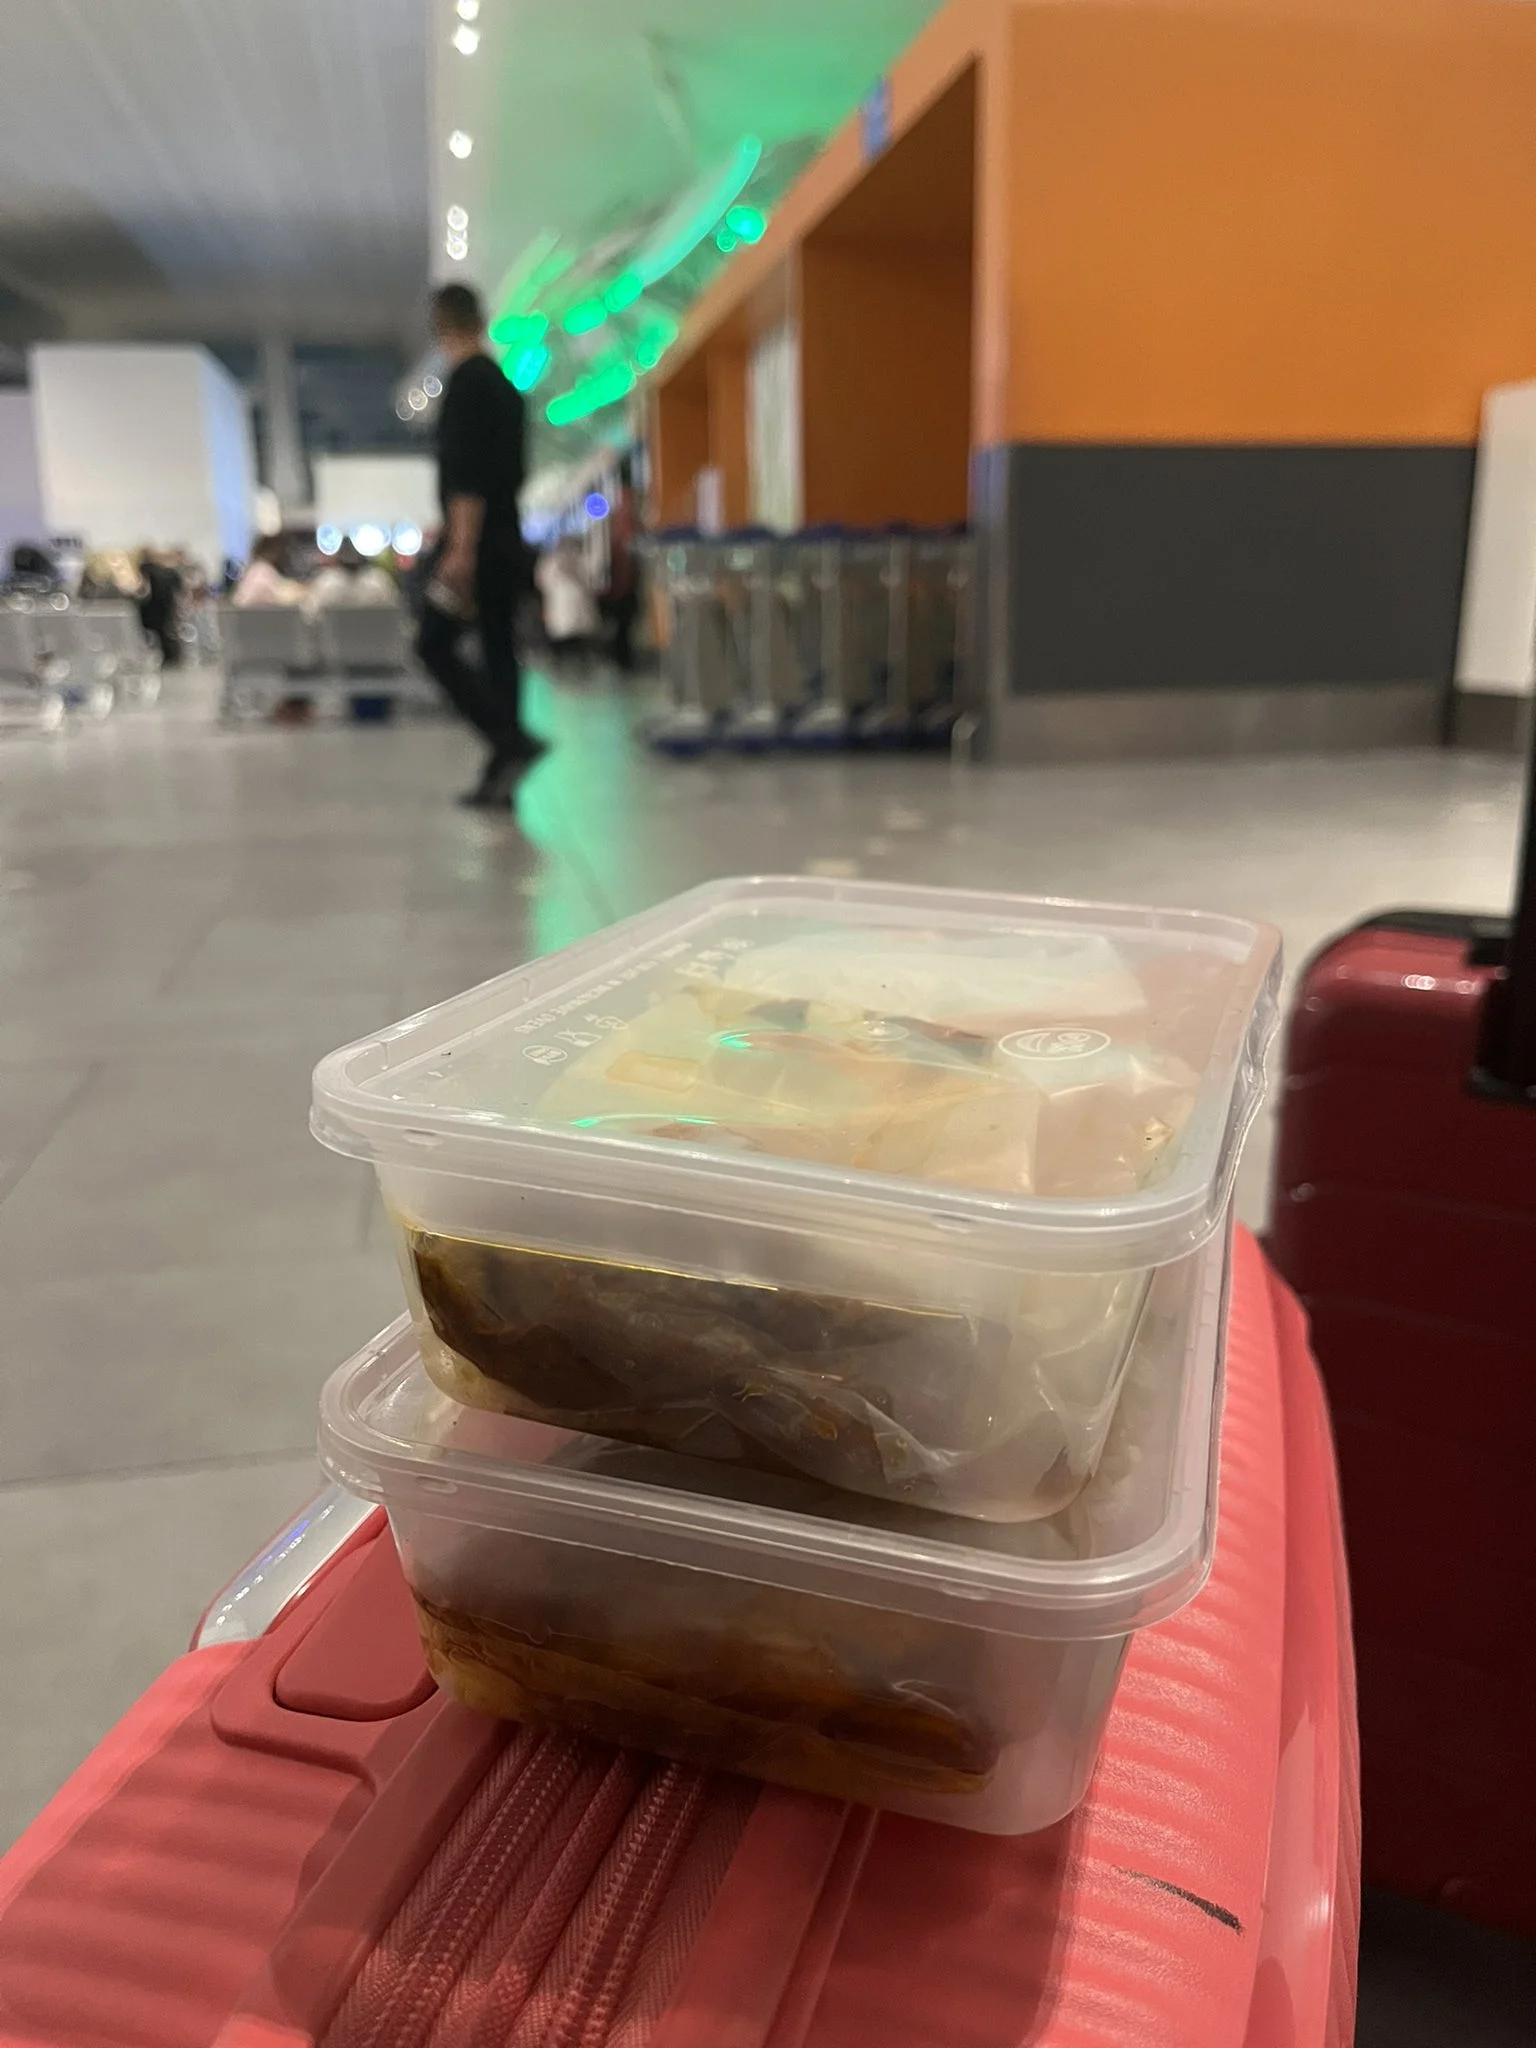 M'sian woman seen selling meals at klia2 to fund cancer treatment, netizens come together to help